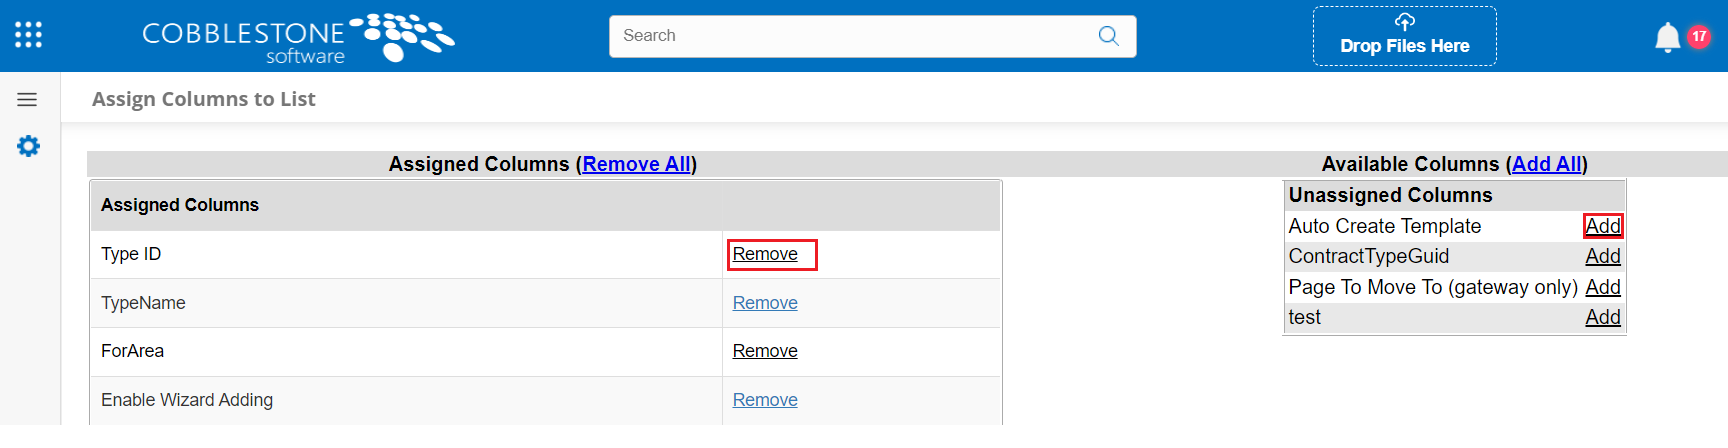 The Assign Columns to List Page. The Remove link is highlighted on the top item in Assigned Columns. The Add link is highlighted in the top item in Unassigned Columns